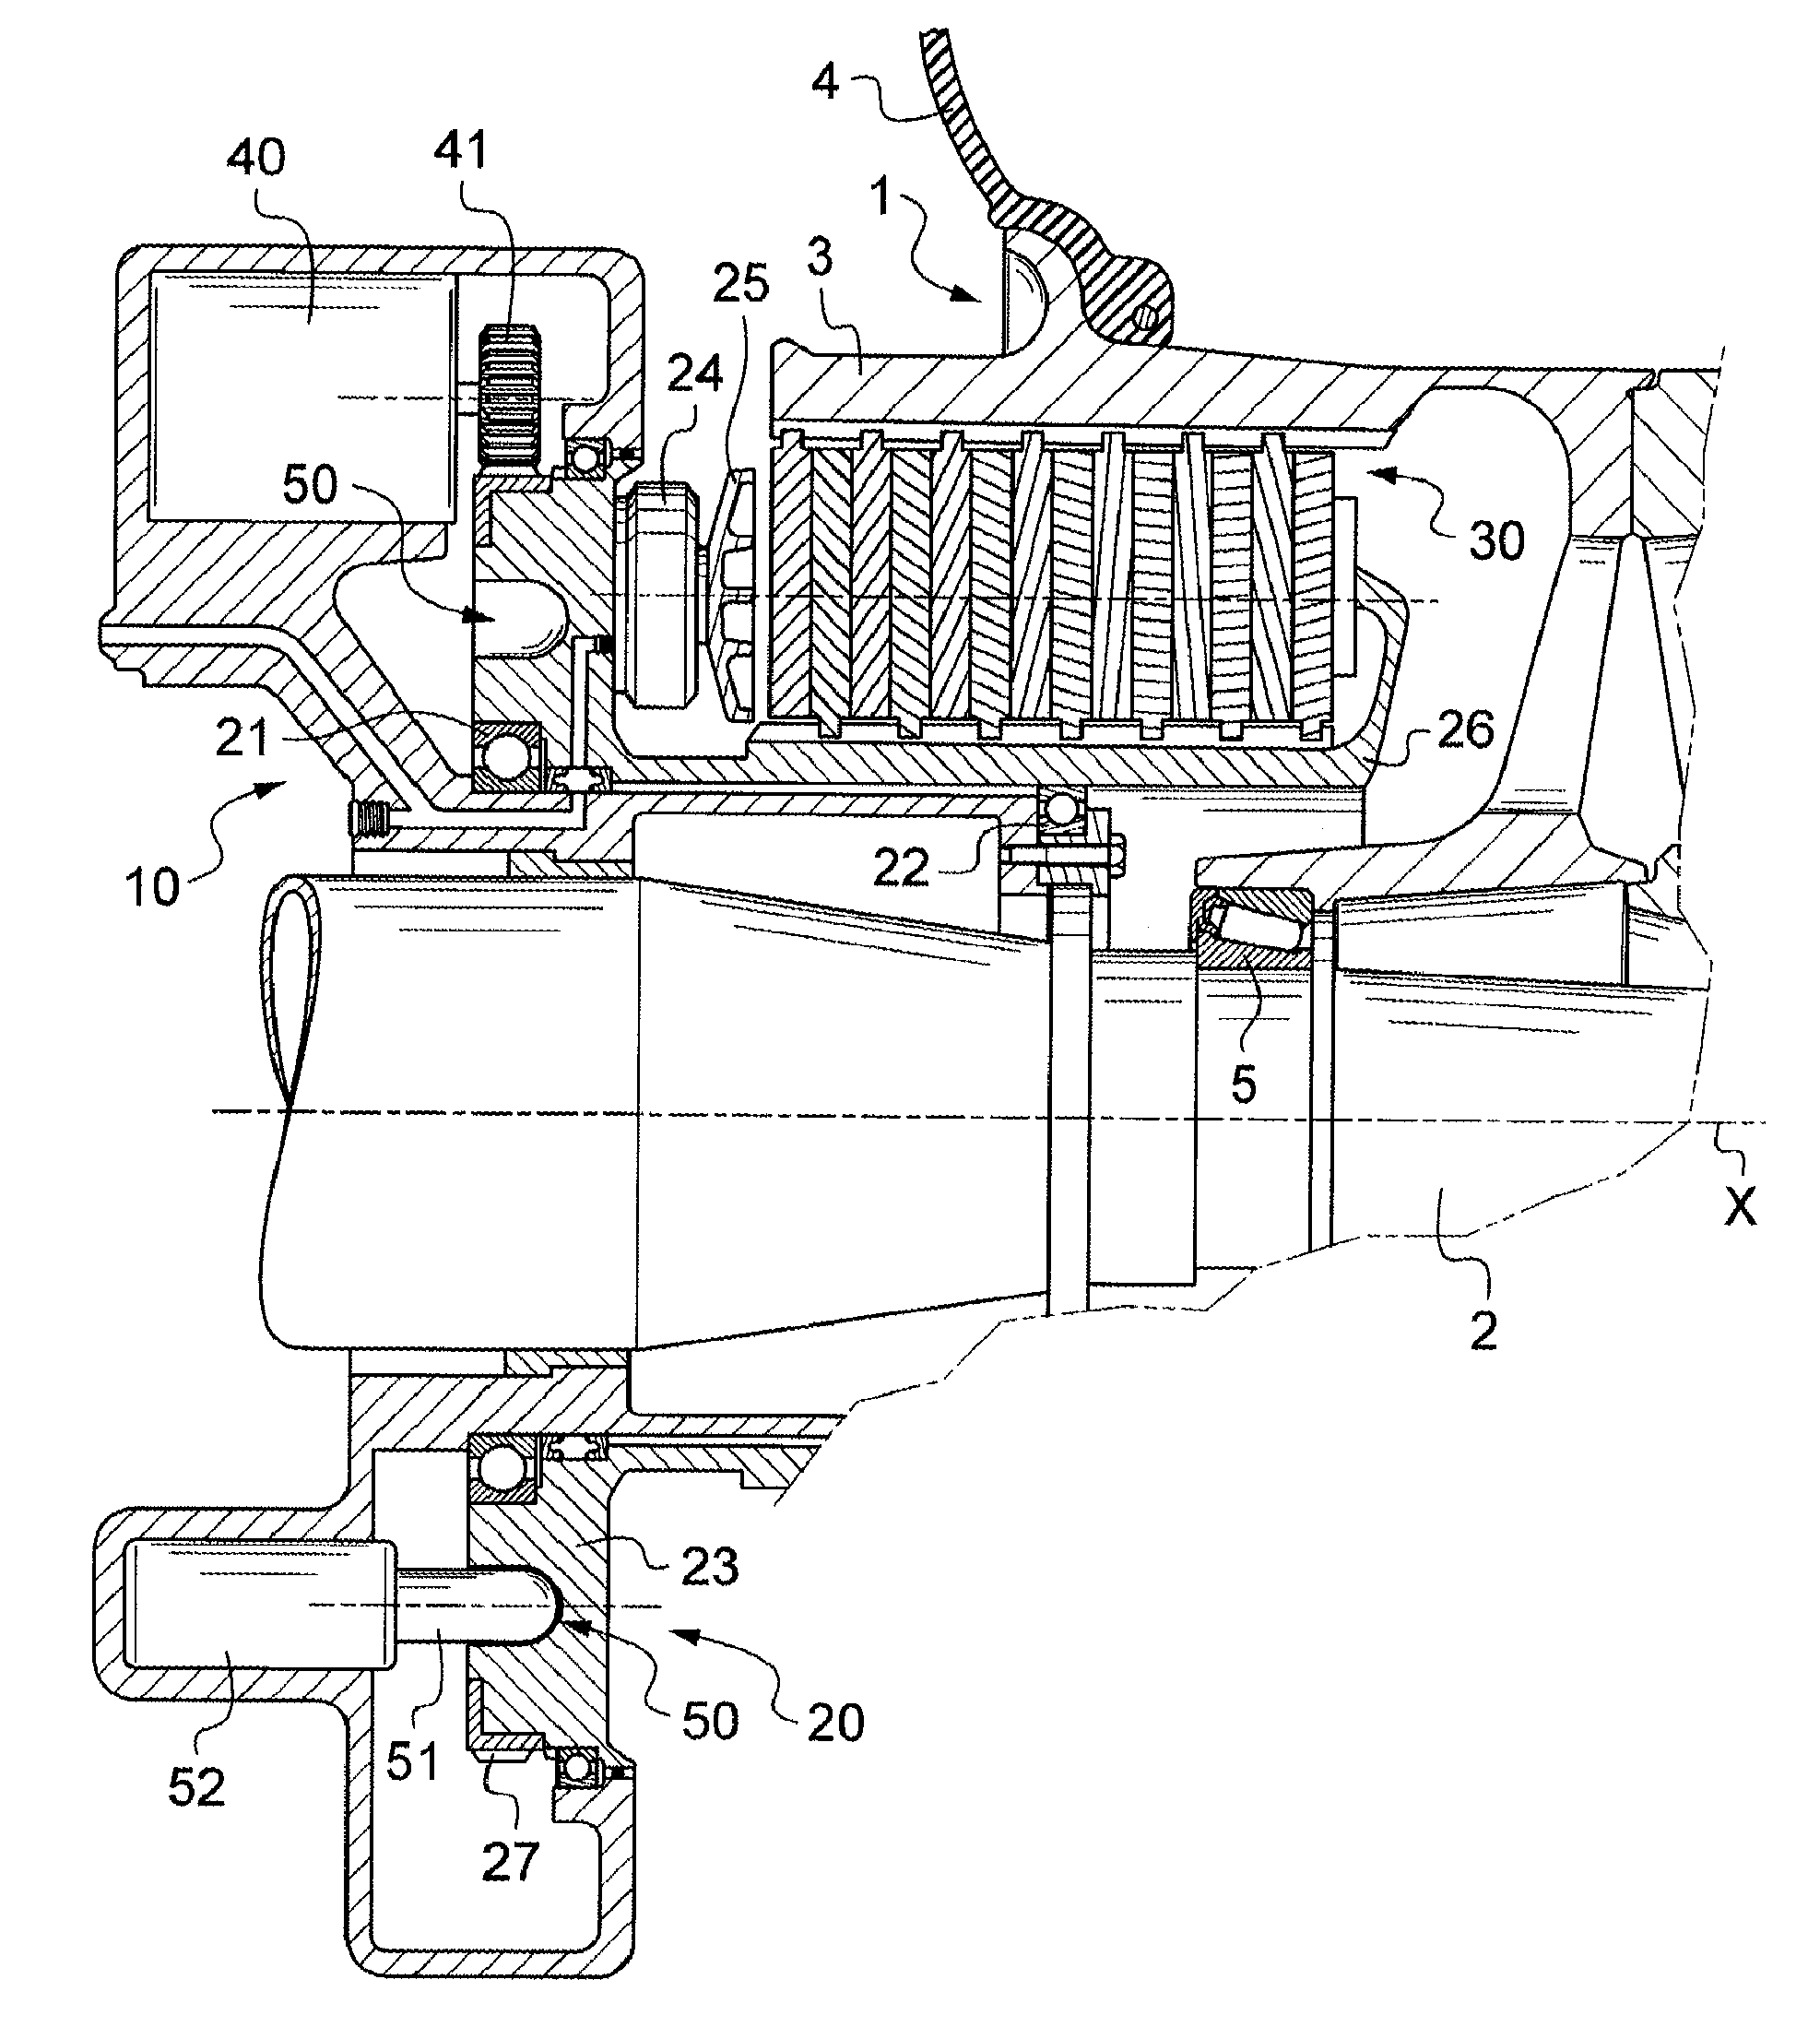 Device for braking and rotating an aircraft wheel